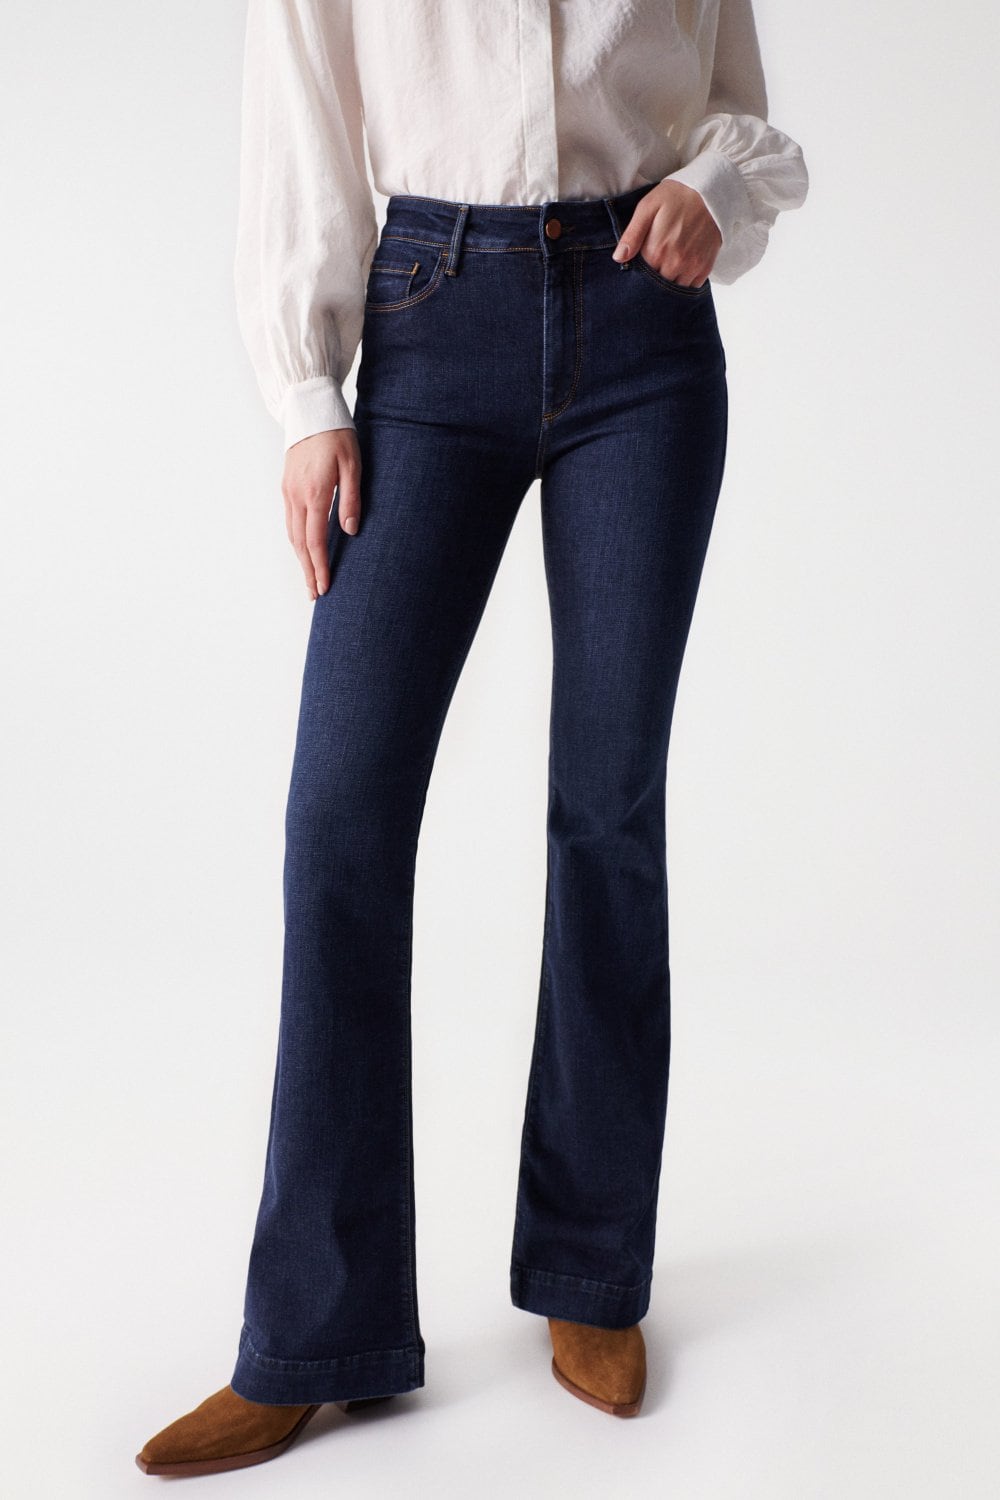 Destiny Flare Push-Up in Dark Wash Jeans Salsa Jeans   